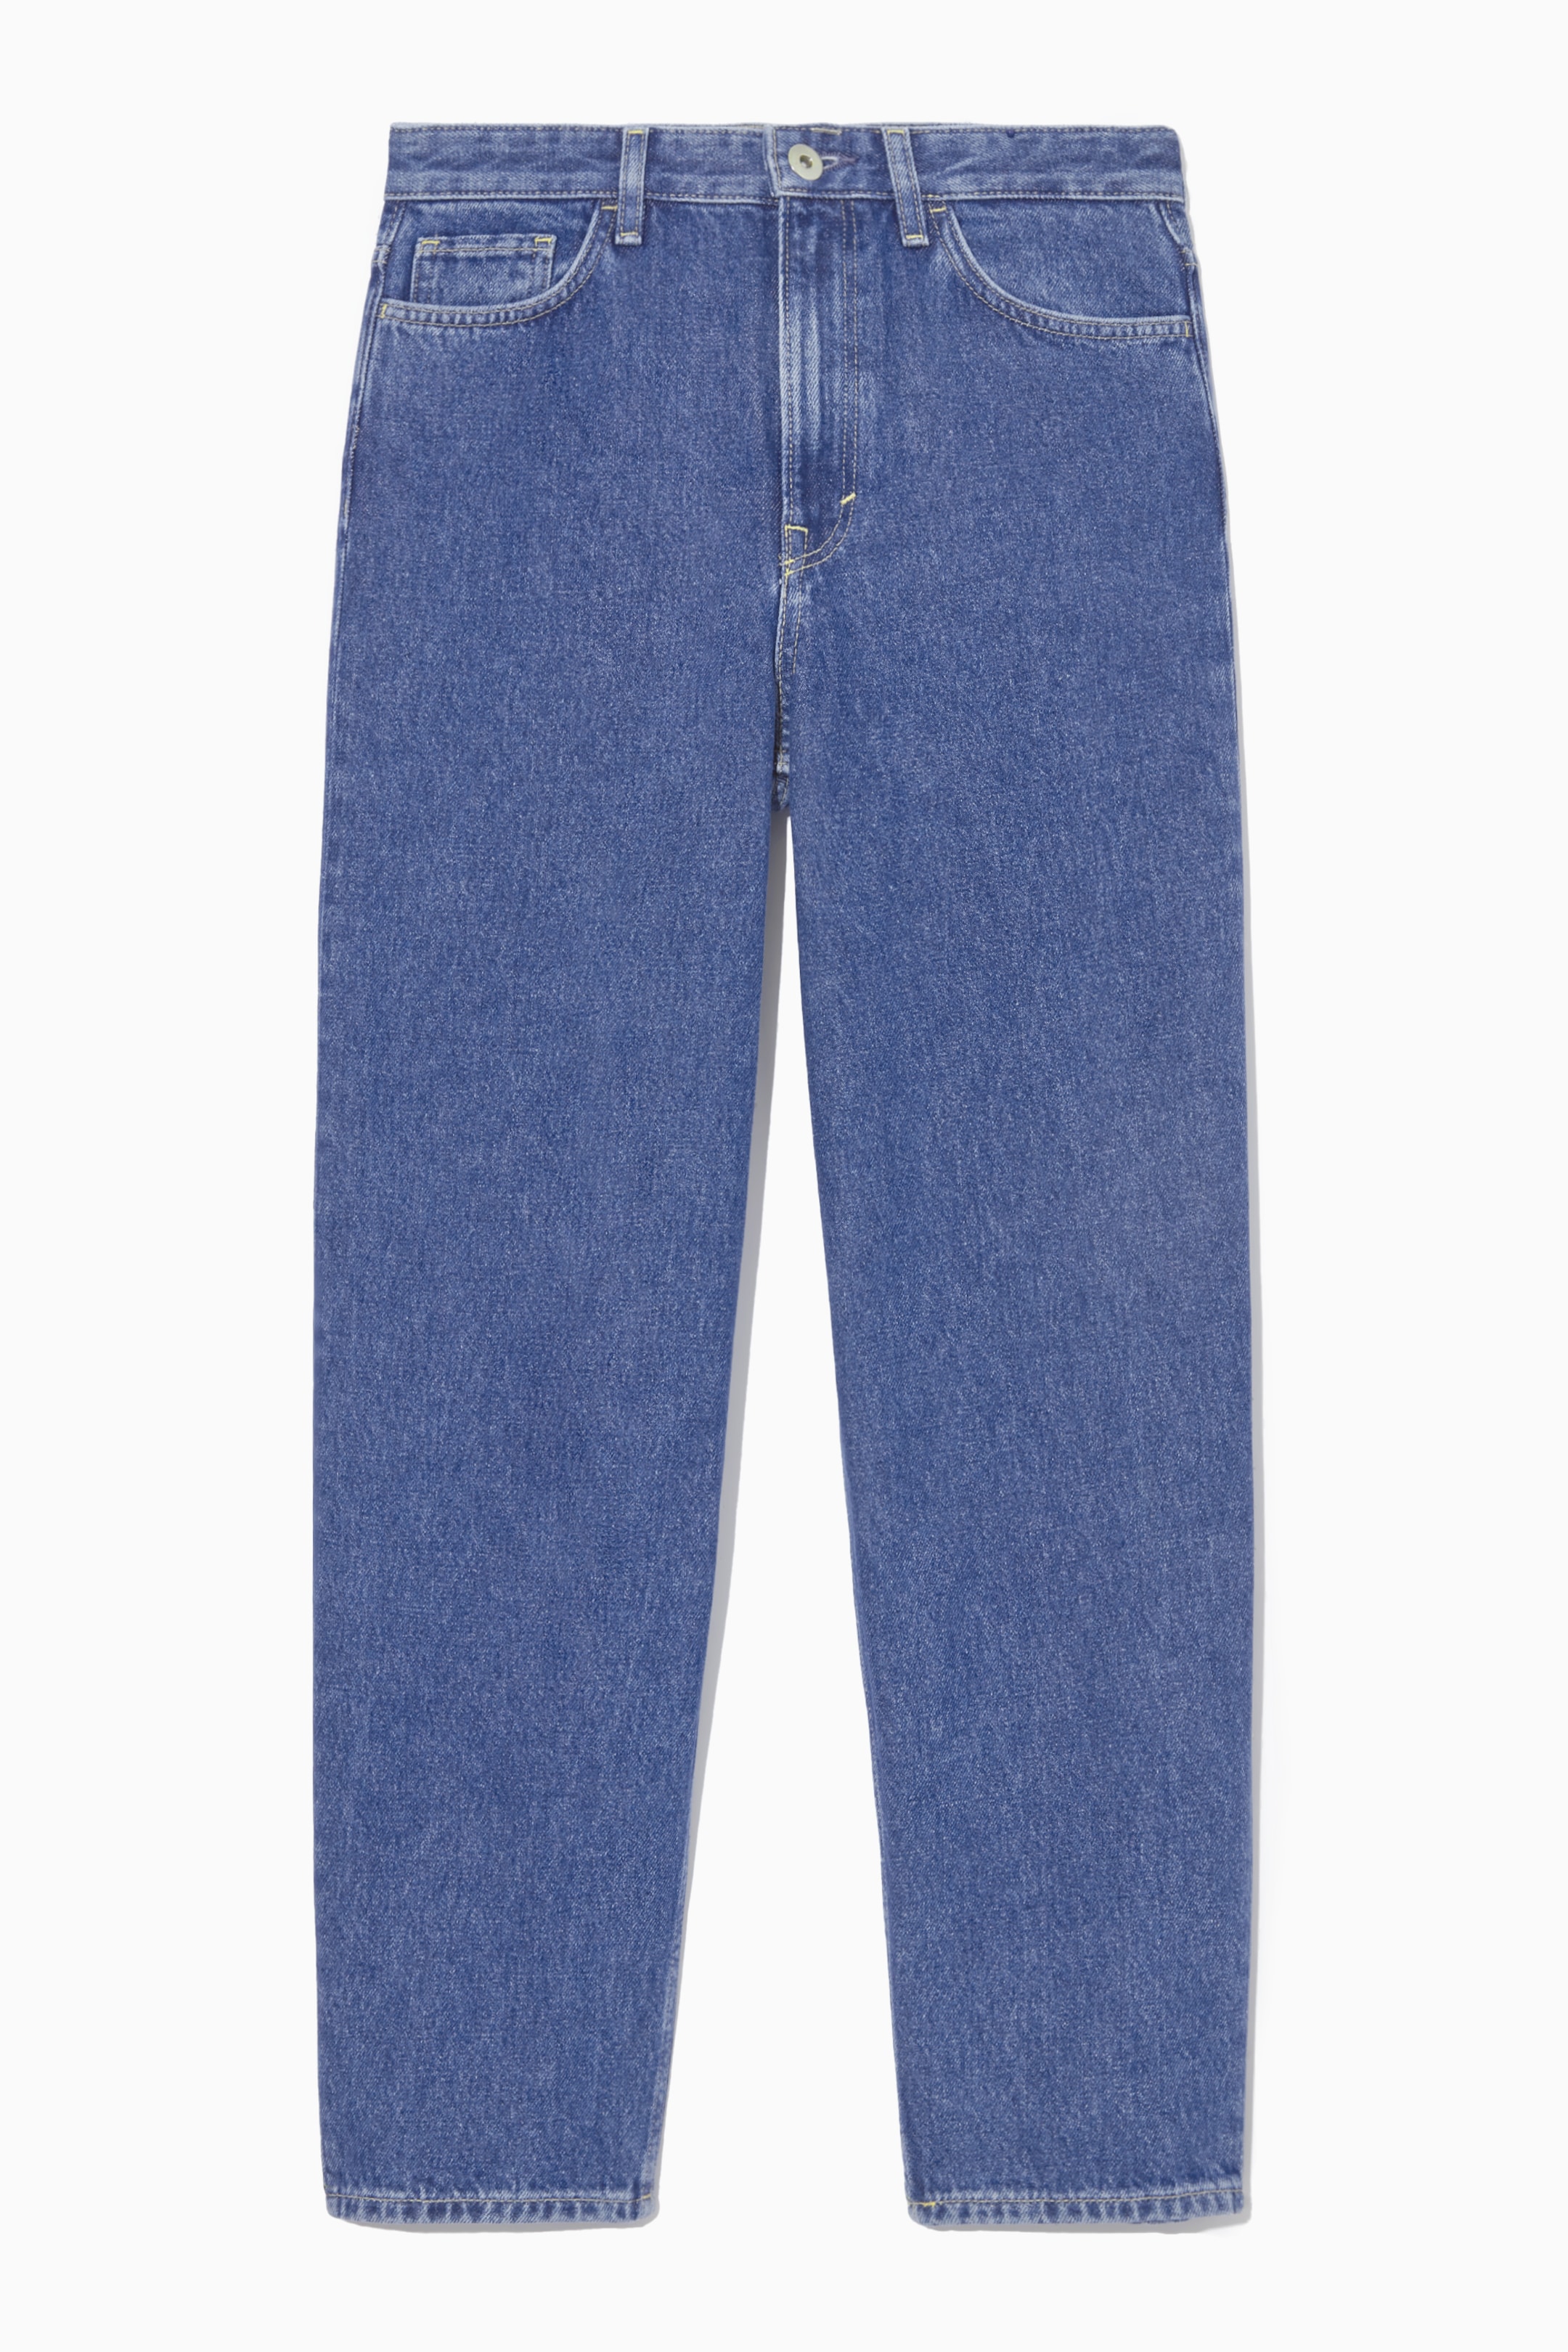 Arch jeans - tapered - WASHED BLUE - women | COS AU